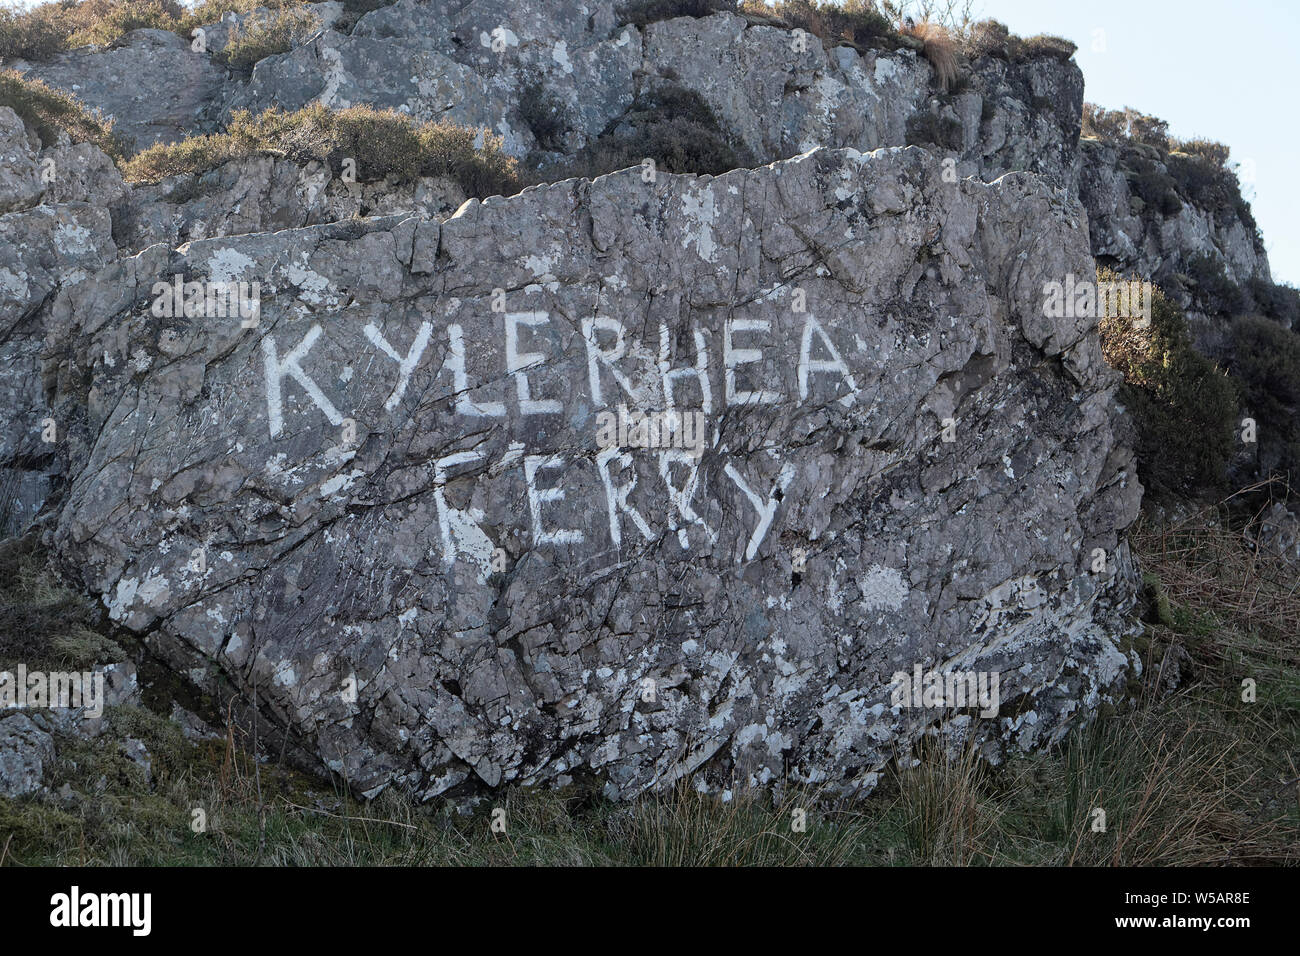 'Kylerhea Ferry' painted on rocks at the ferry landing Stock Photo